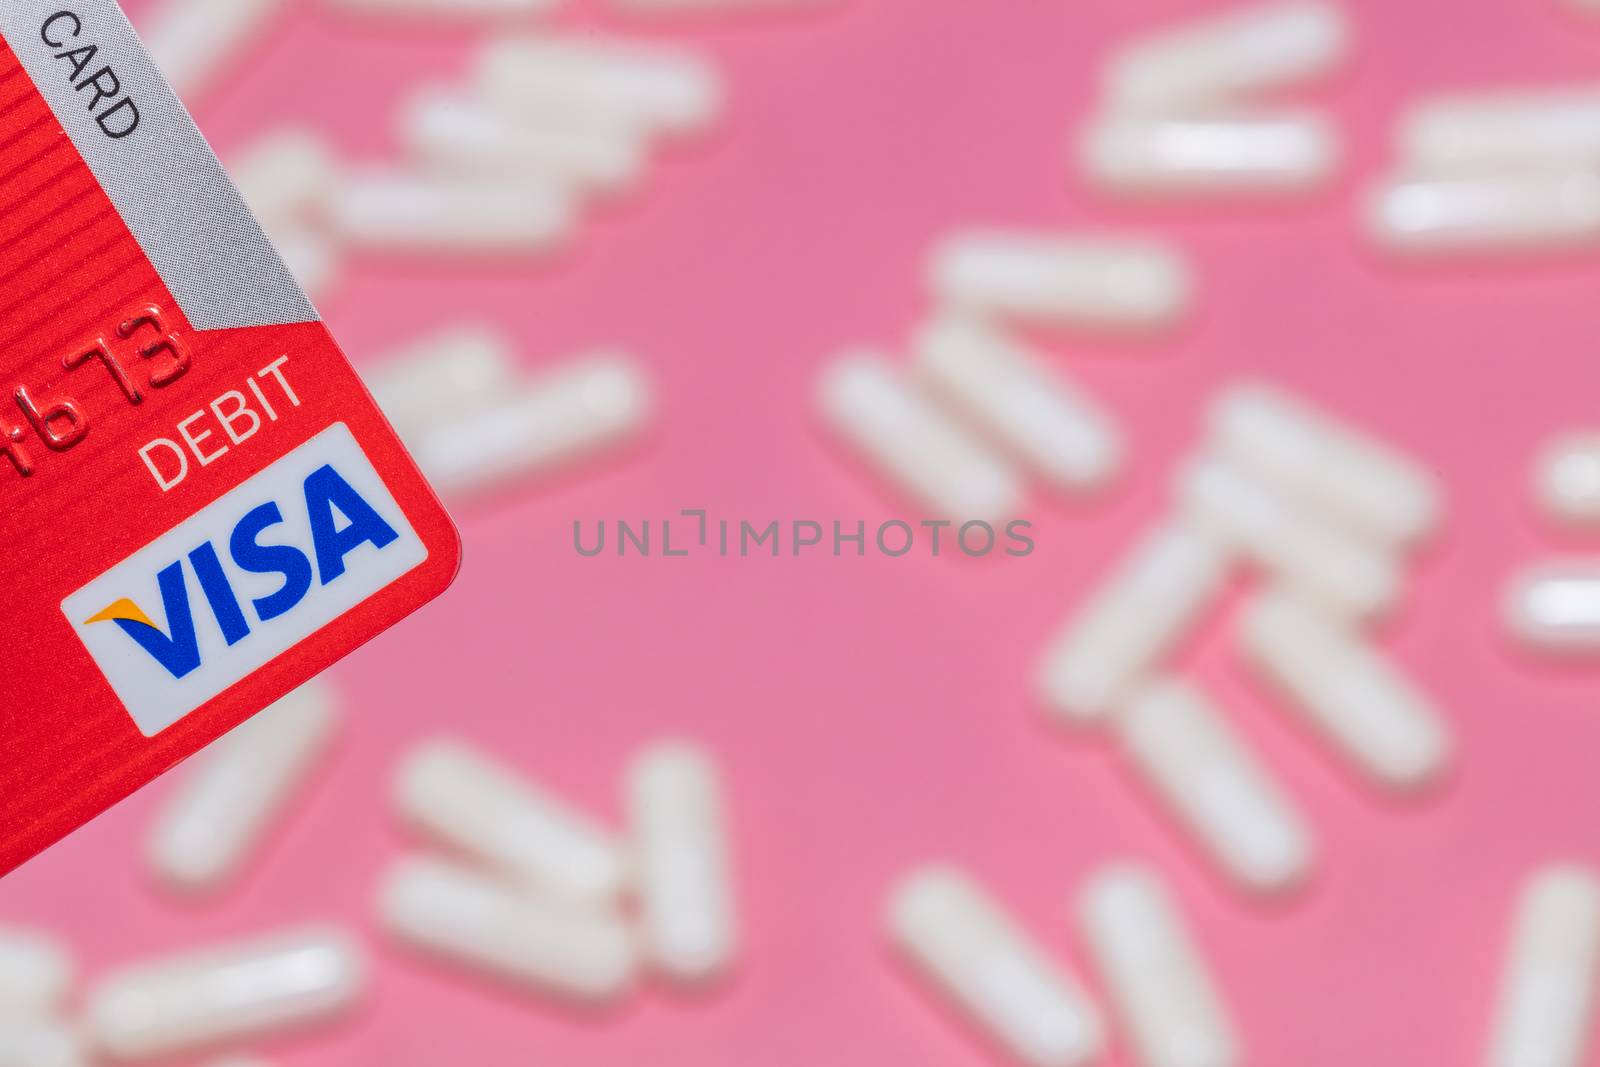 Barnaul, Russia - October 13, 2020: Shot of a corner of a red visa debit card and white pills out of focus on pink background. Healthcare, pharmaceutical business, commerce, shopping concepts.